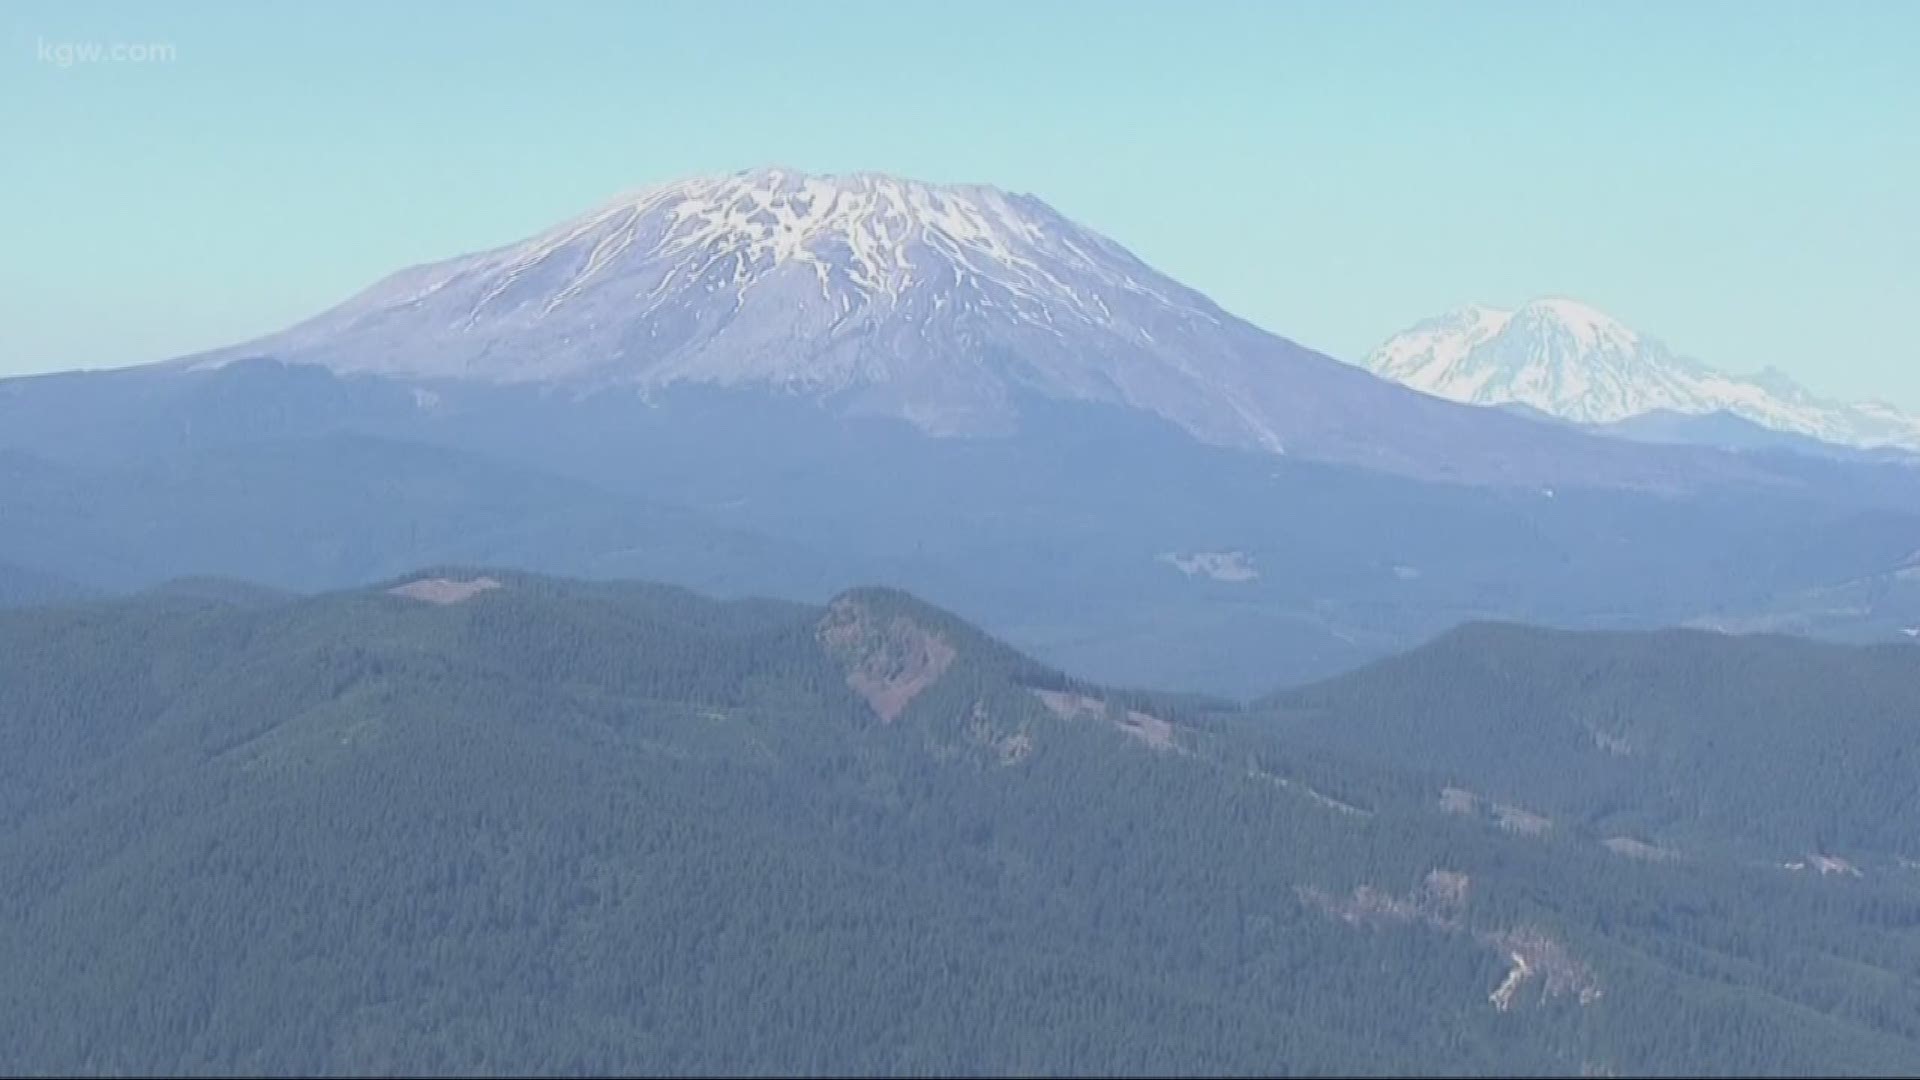 Hiker falls to death after suffering medical event on Mount St. Helens